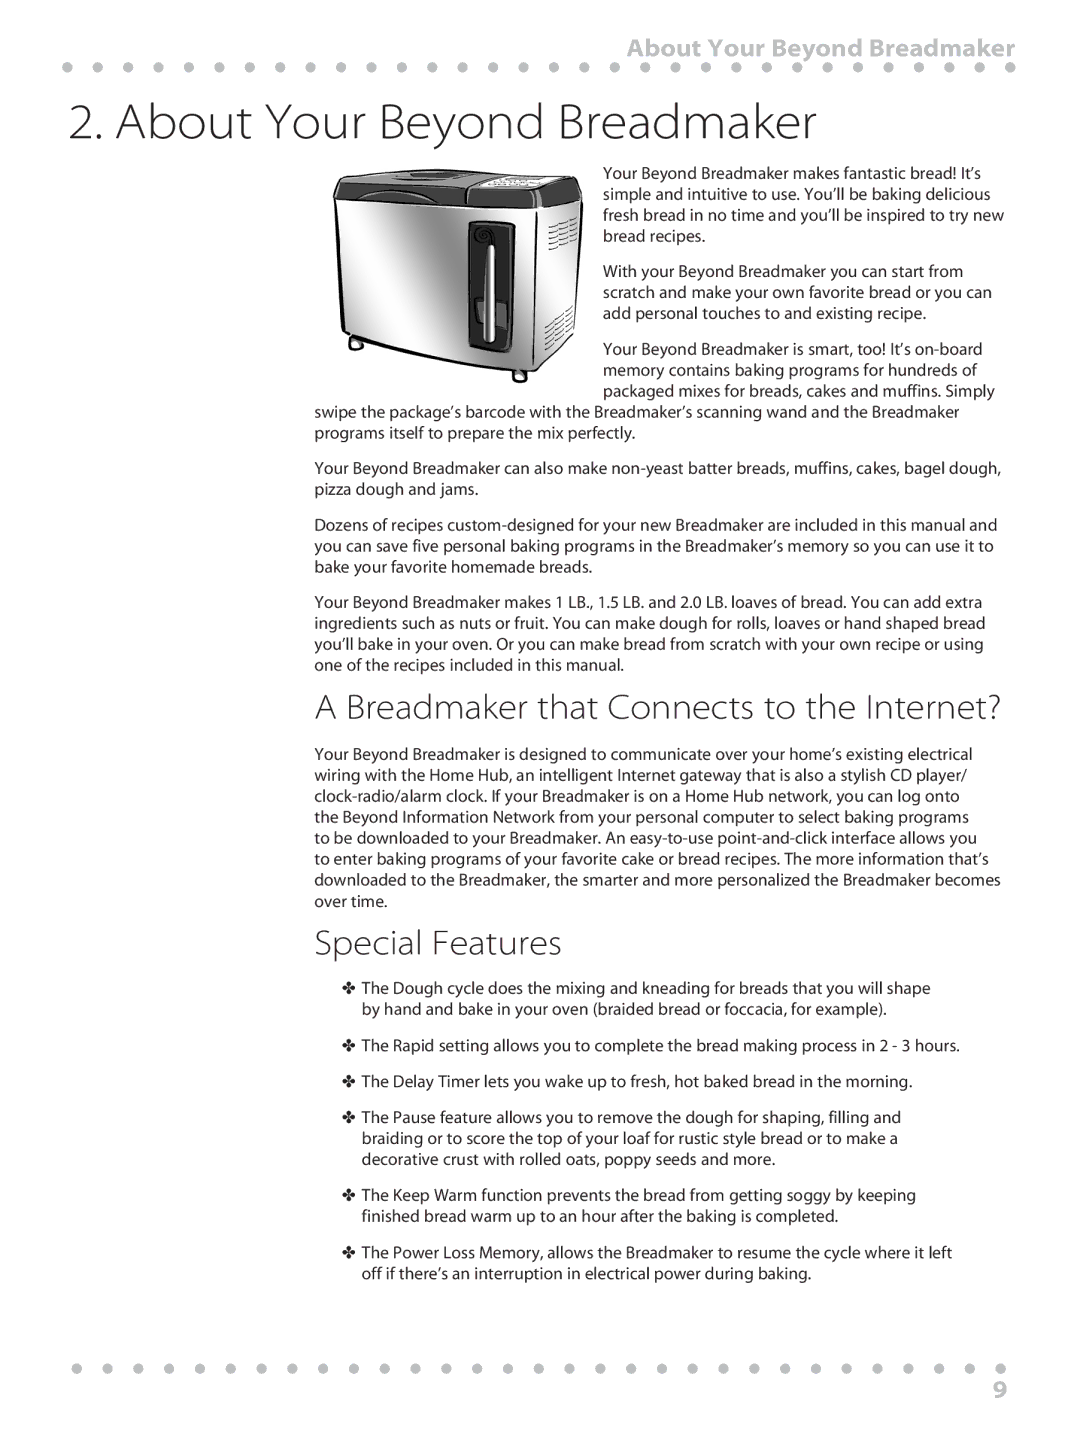 Toastmaster WBYBM1 manual About Your Beyond Breadmaker, Breadmaker that Connects to the Internet?, Special Features 